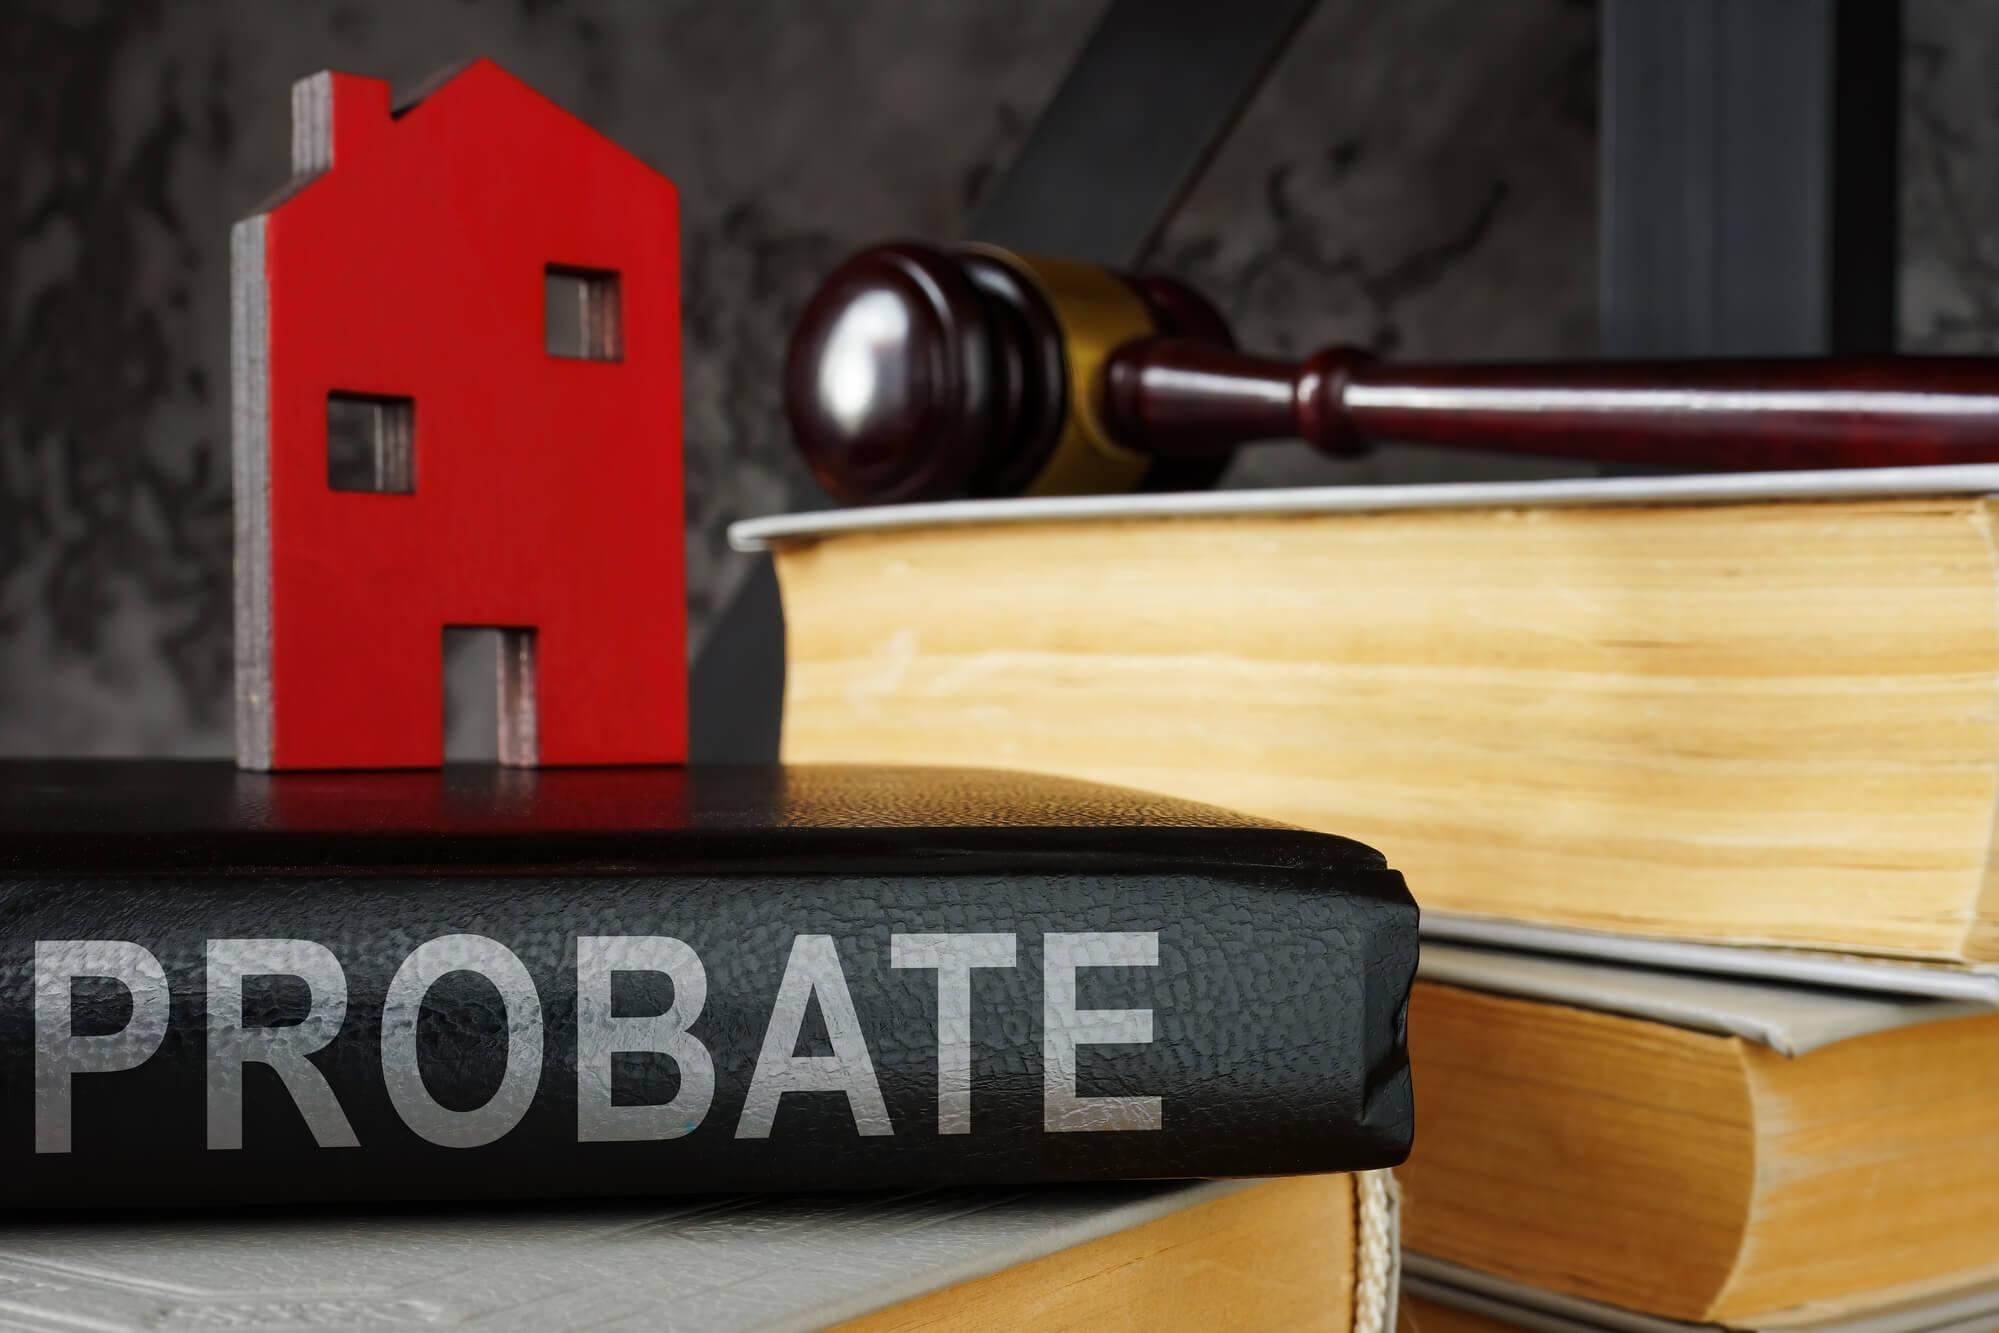 how long does probate take